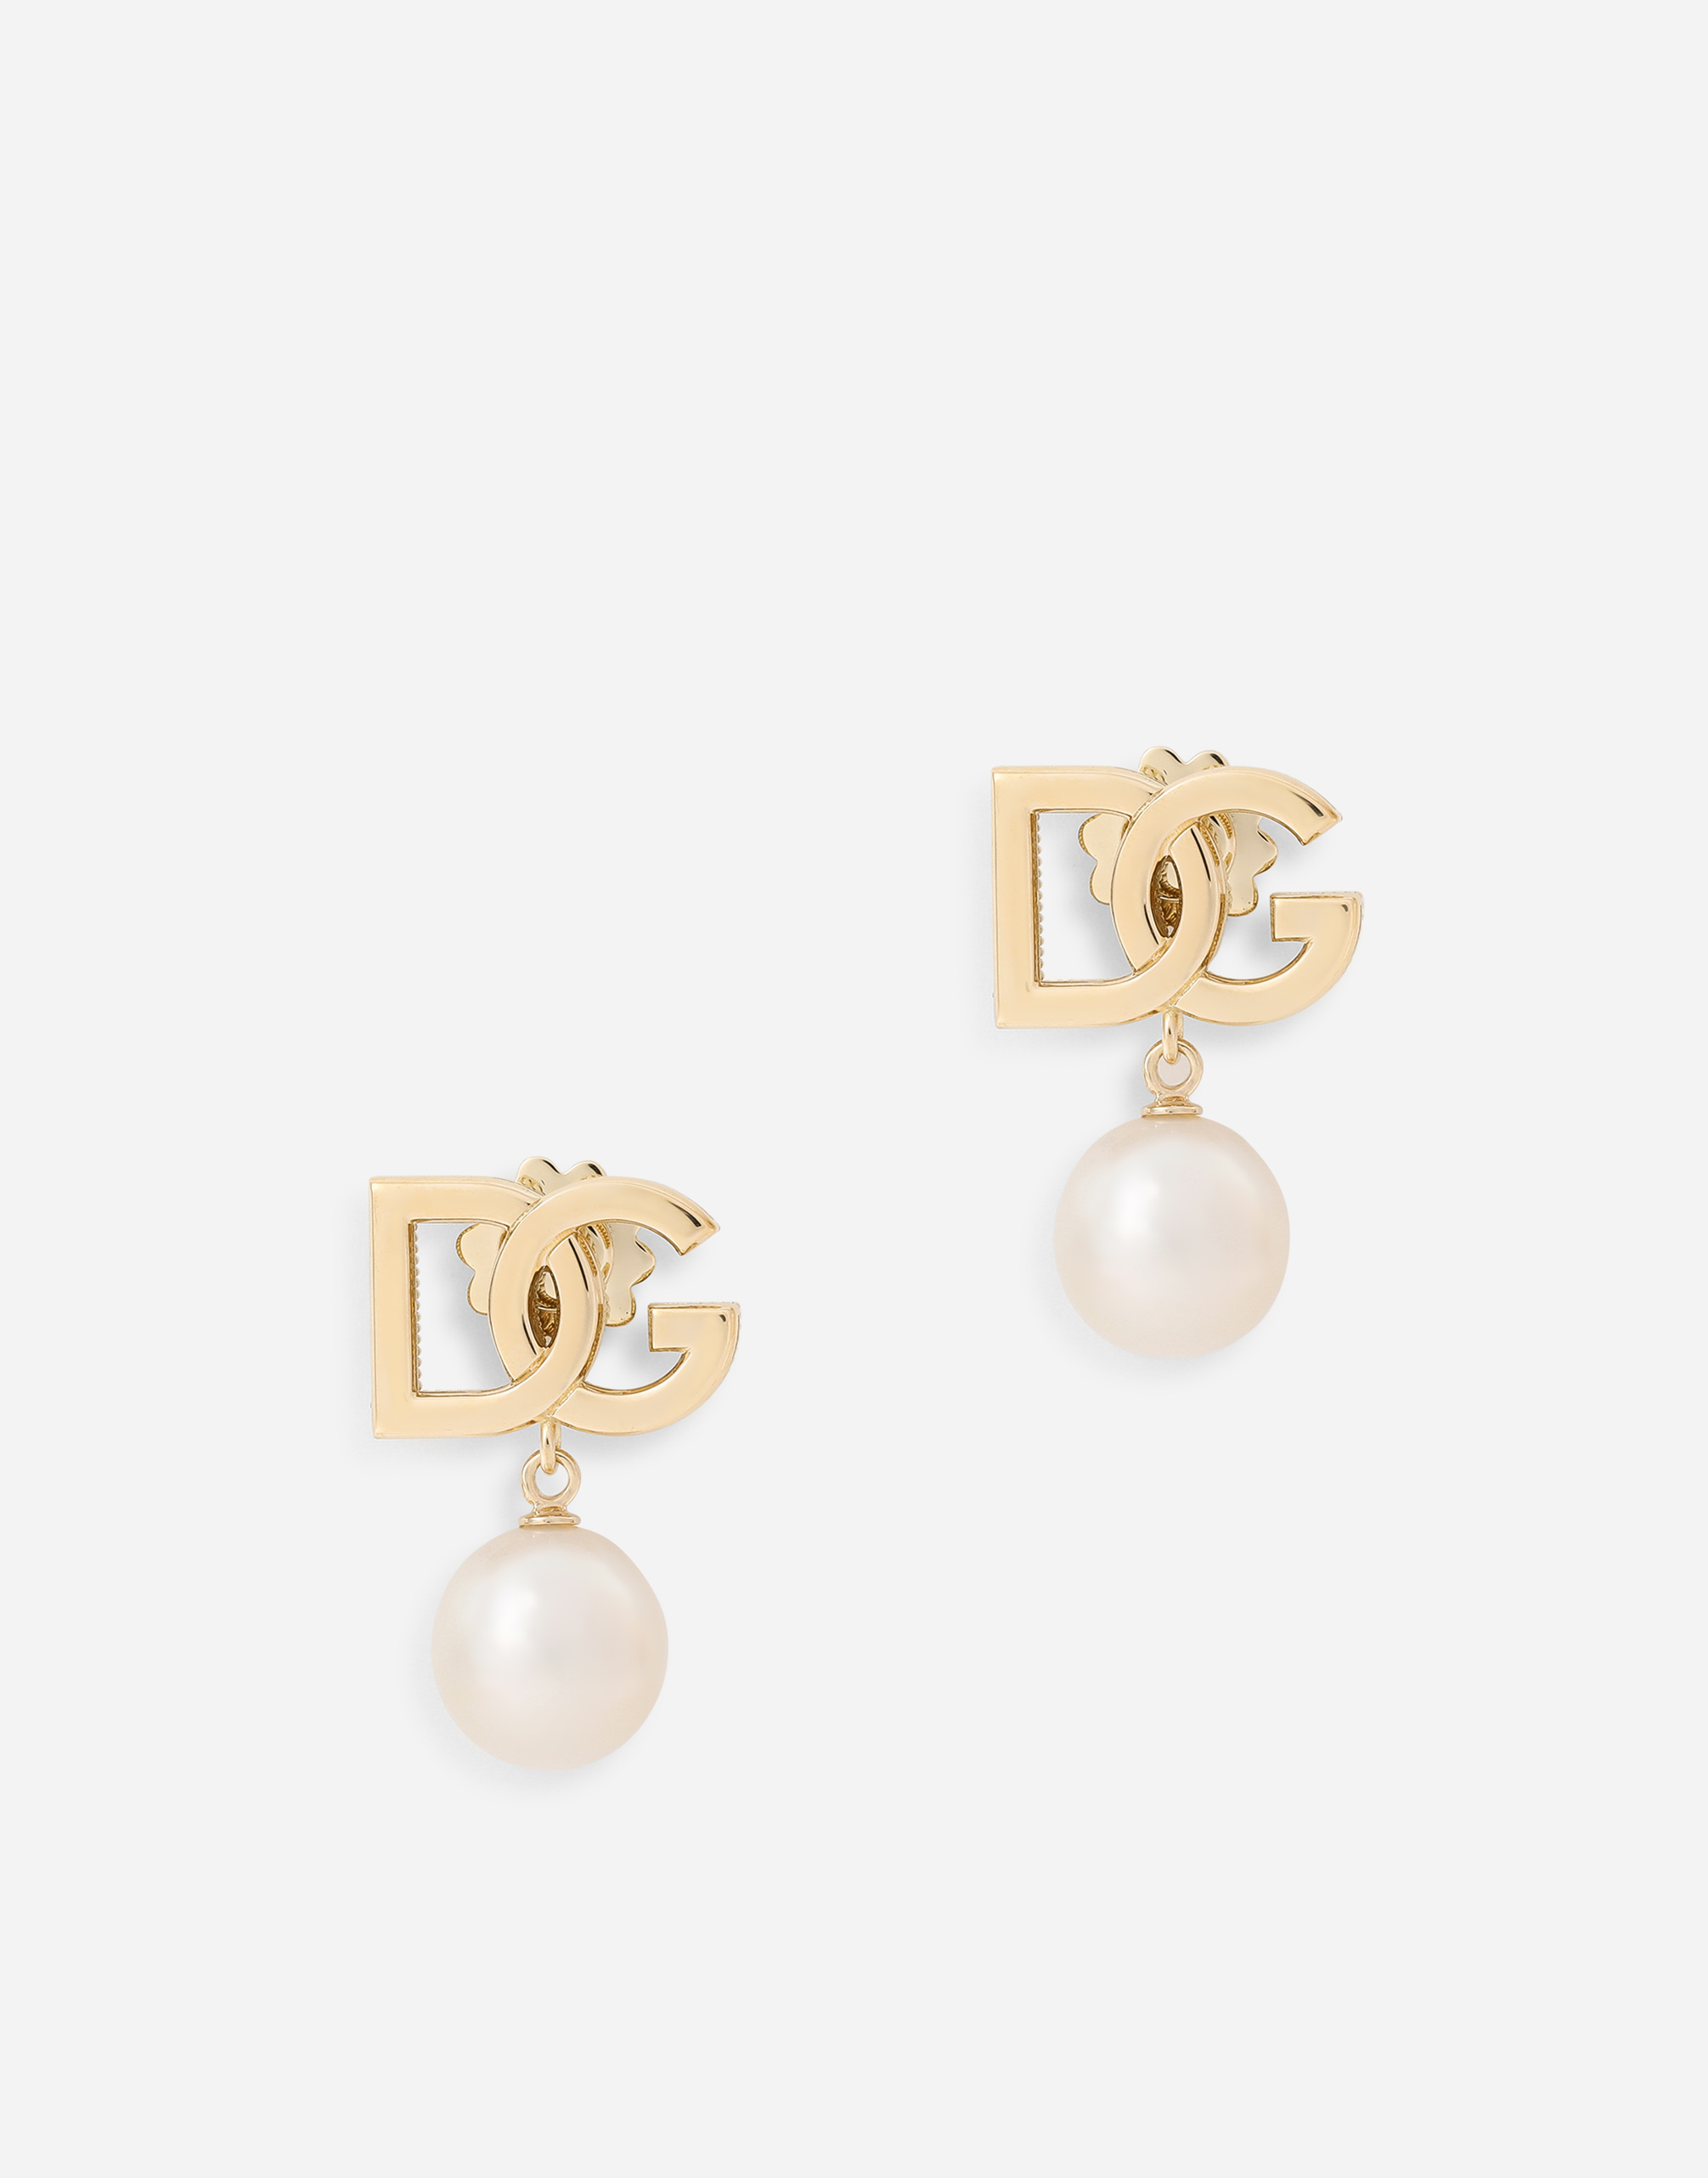 Dolce & Gabbana Logo Earrings In Yellow 18kt Gold With Pearls Yellow Gold Female Onesize